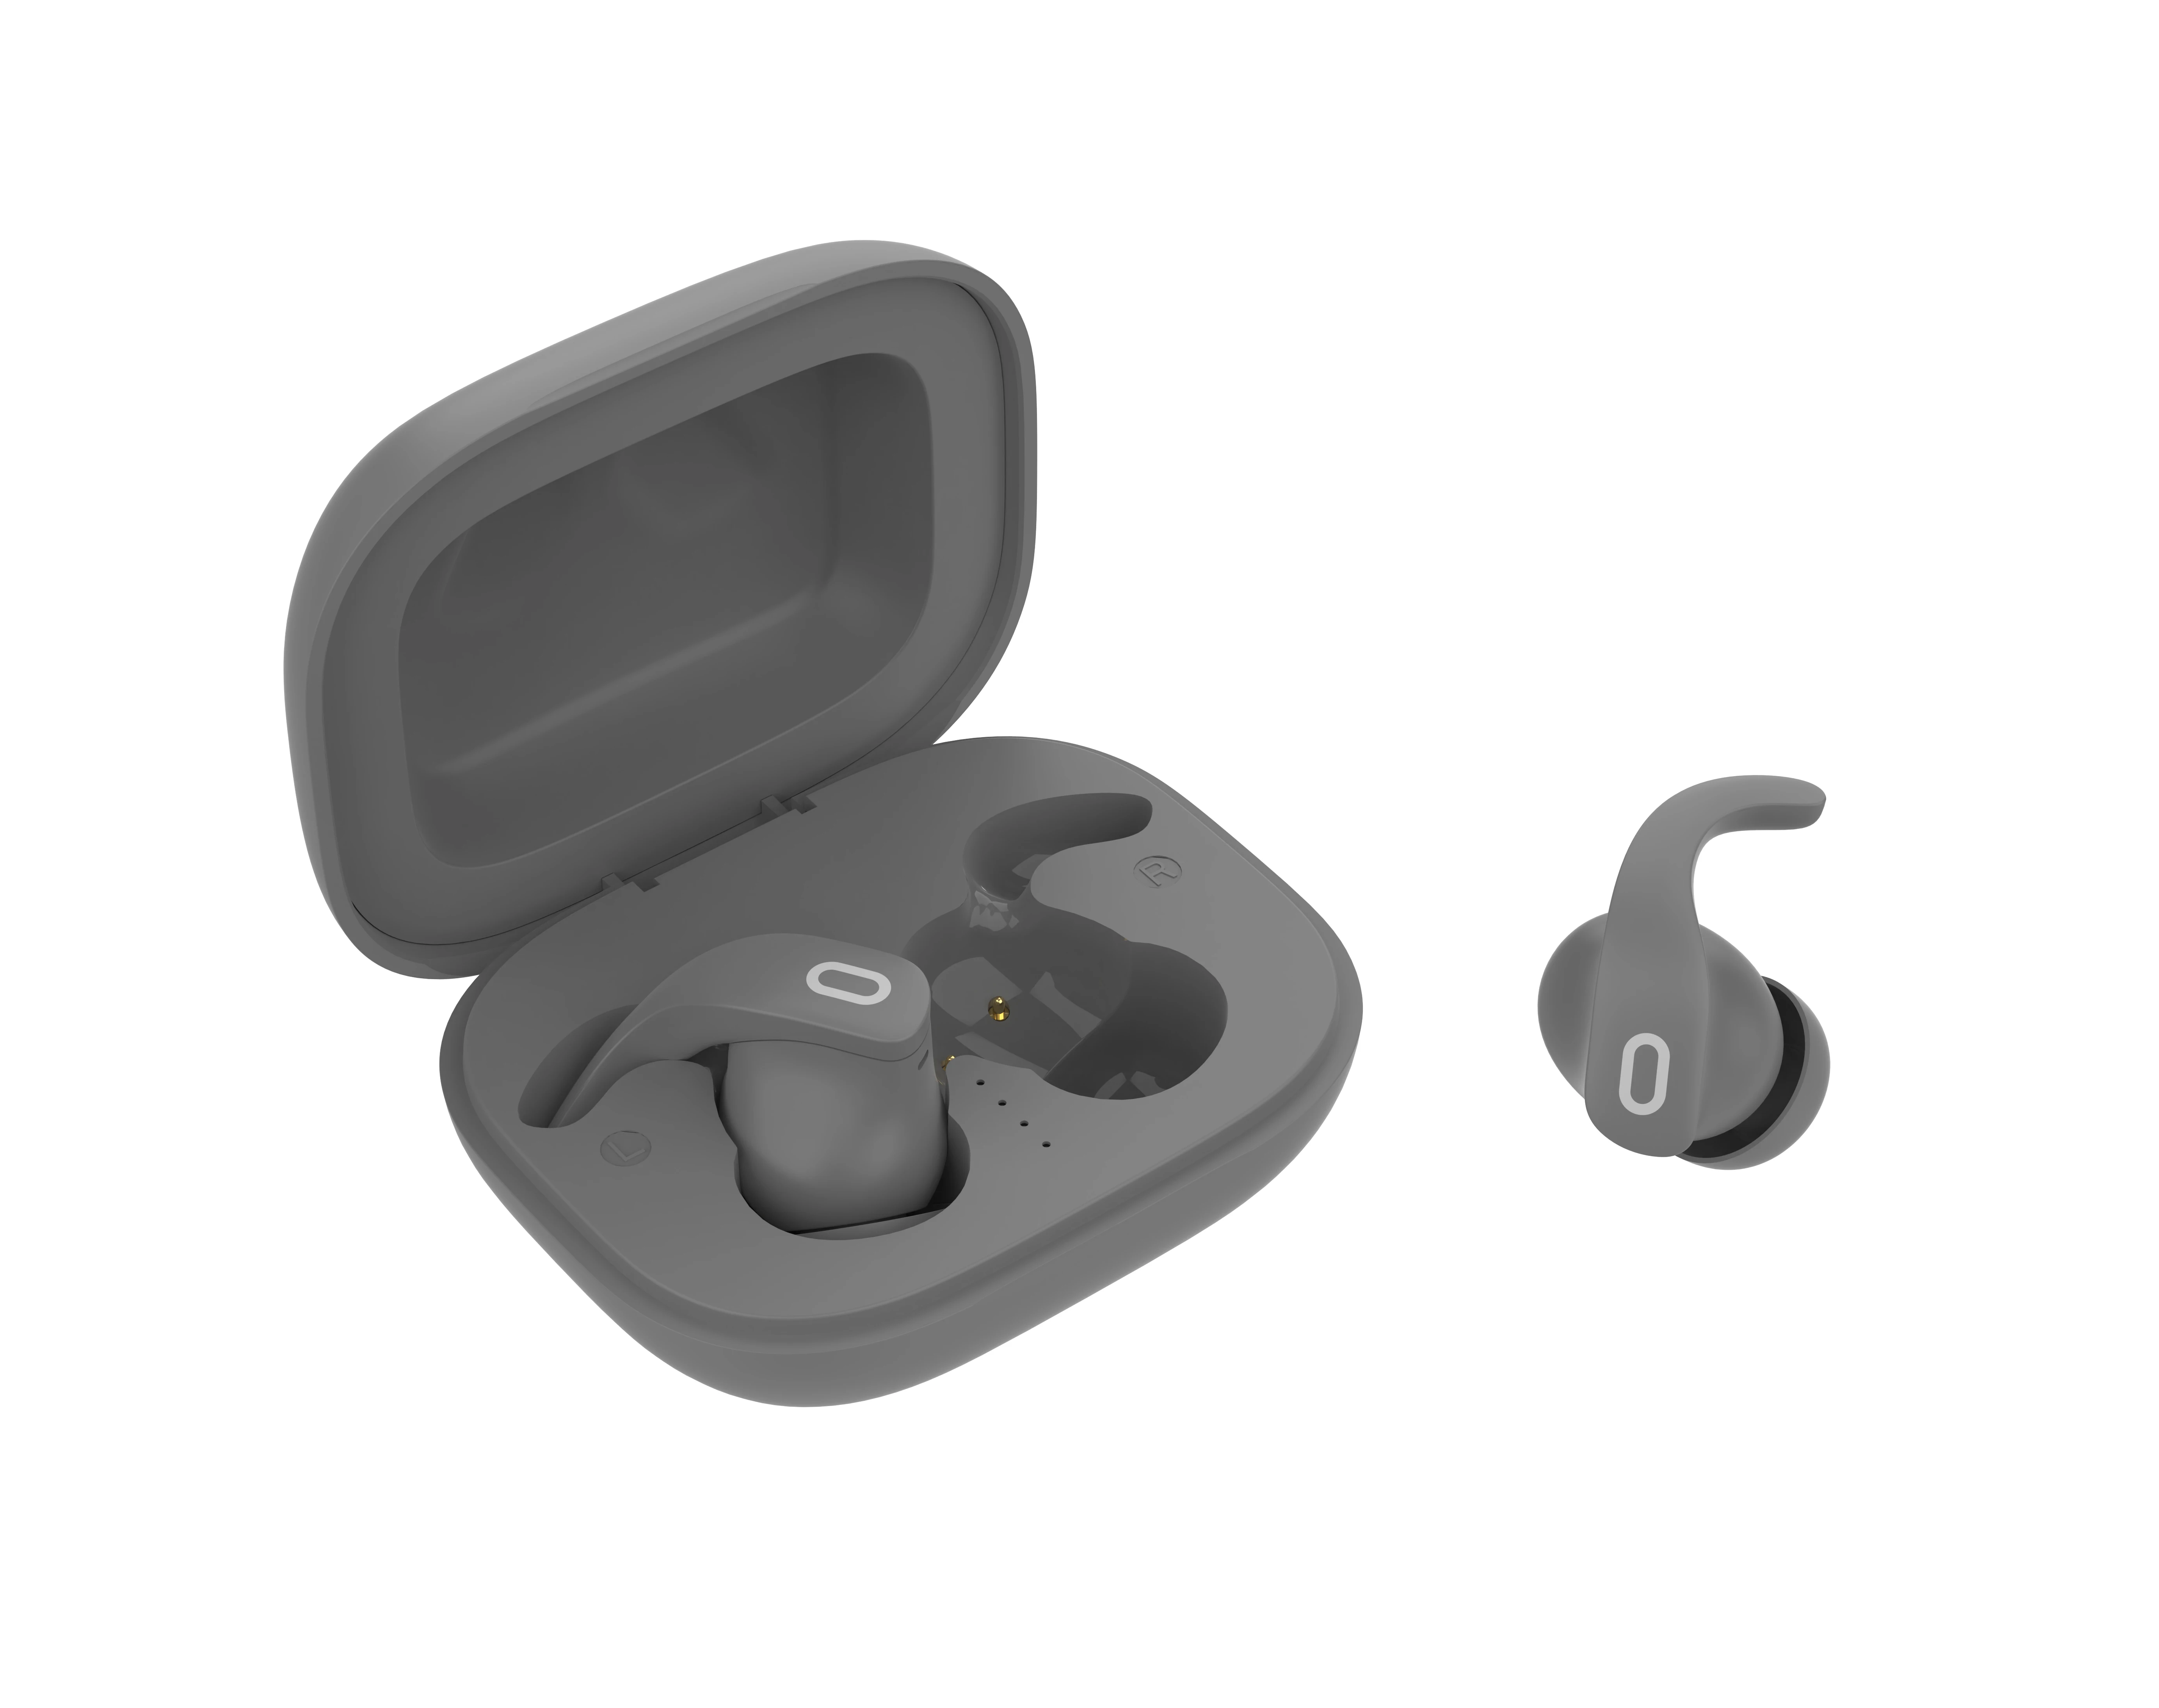 Bluetooth Headphones Touch Control Wireless Earbuds With Charging Case True Wireless Headsets